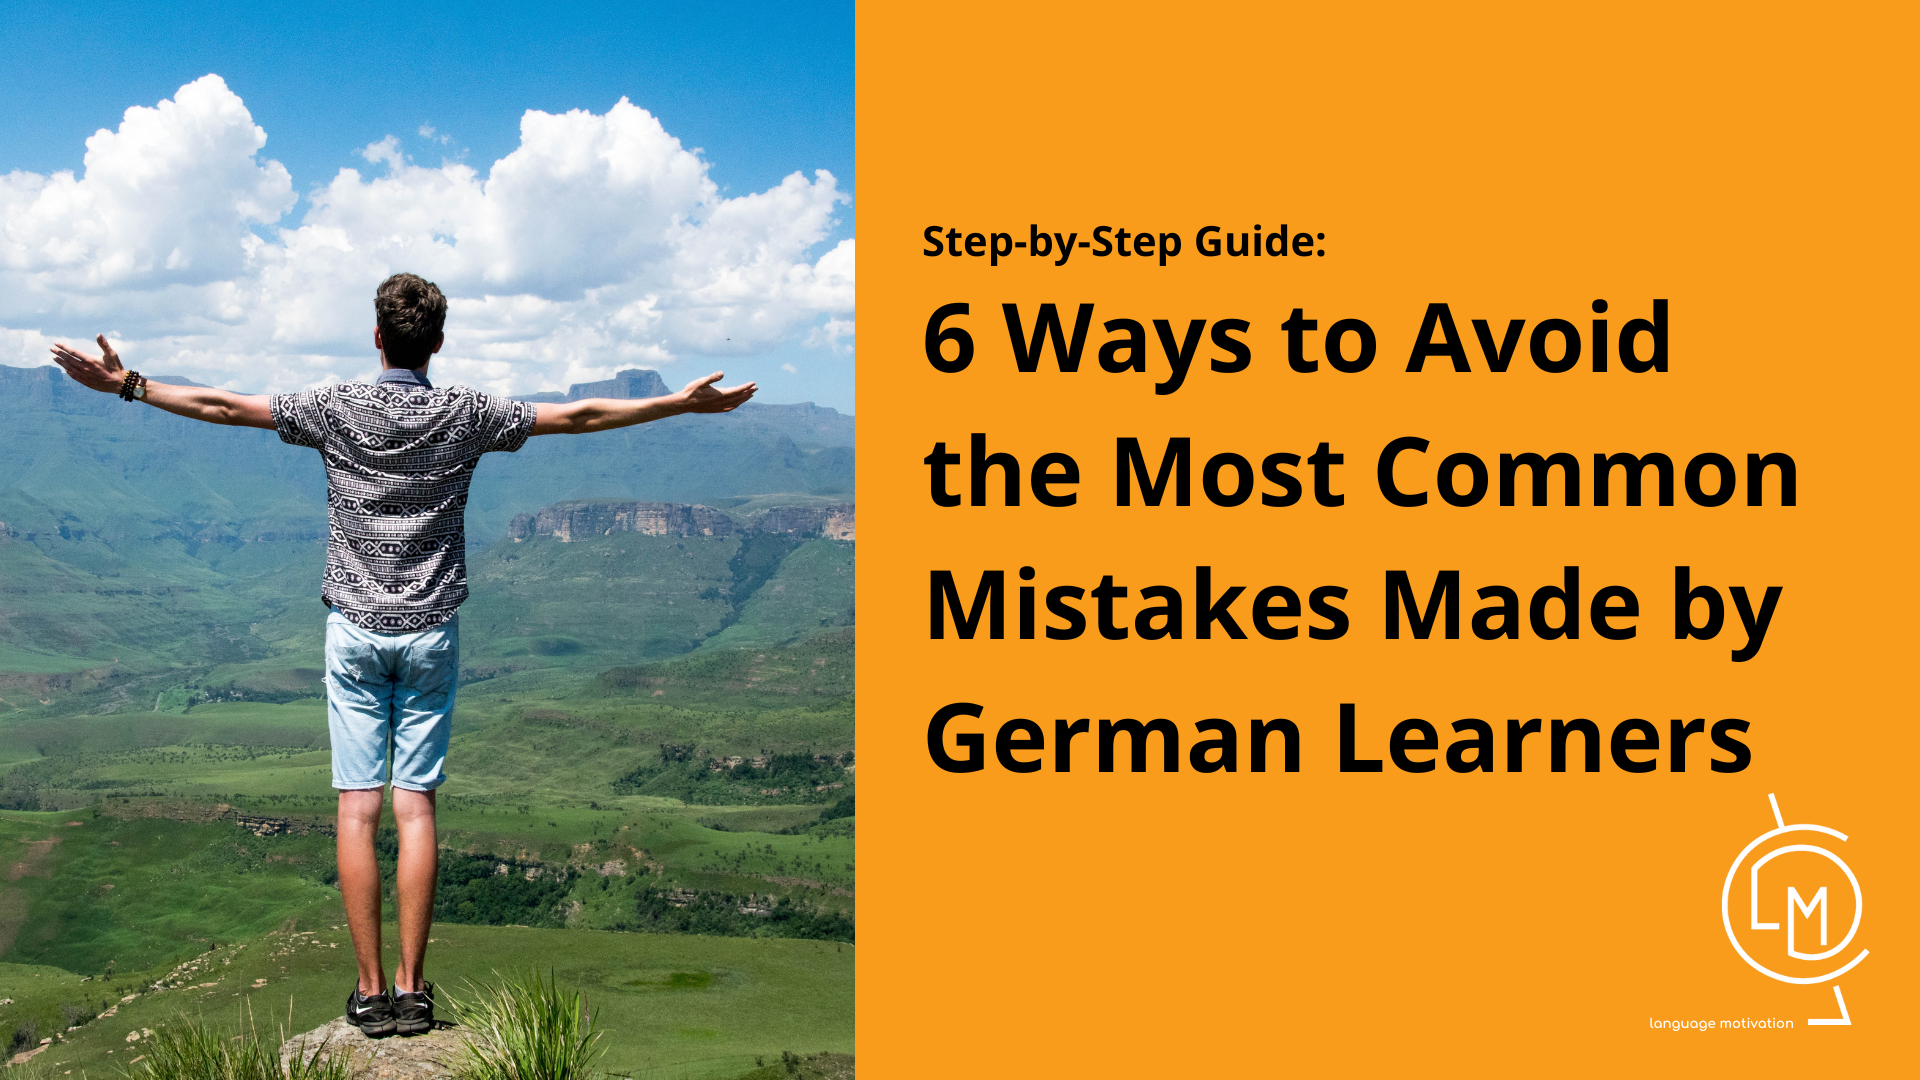 6 Ways to Avoid the Most Common Mistakes Made by German Learners